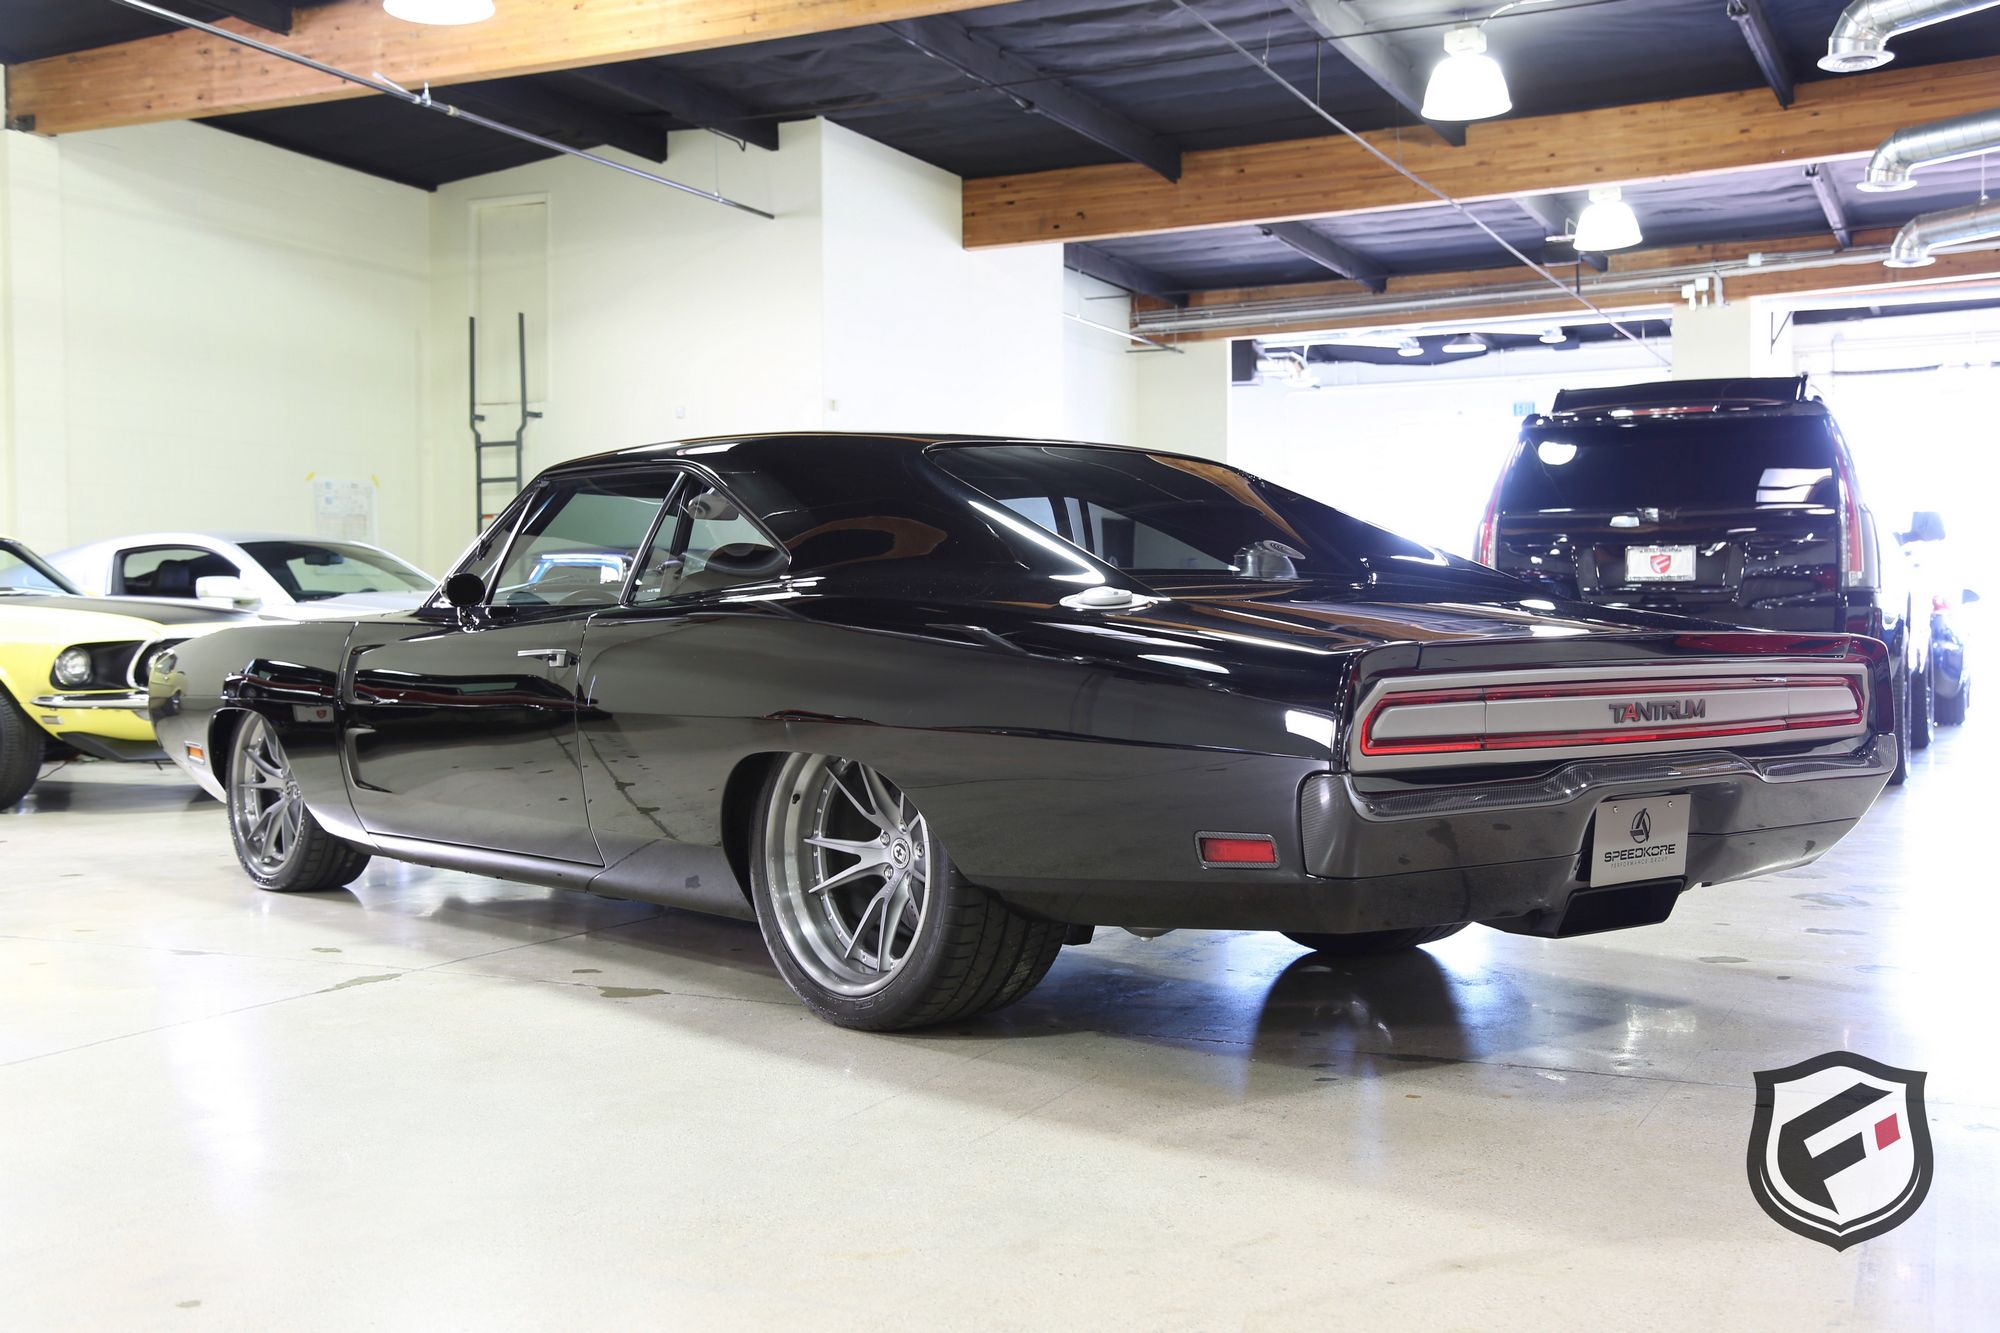 SpeedKore's 1970 Dodge Charger Tantrum Is A 650 HP 9.0 Liter Devil Looking For A Home